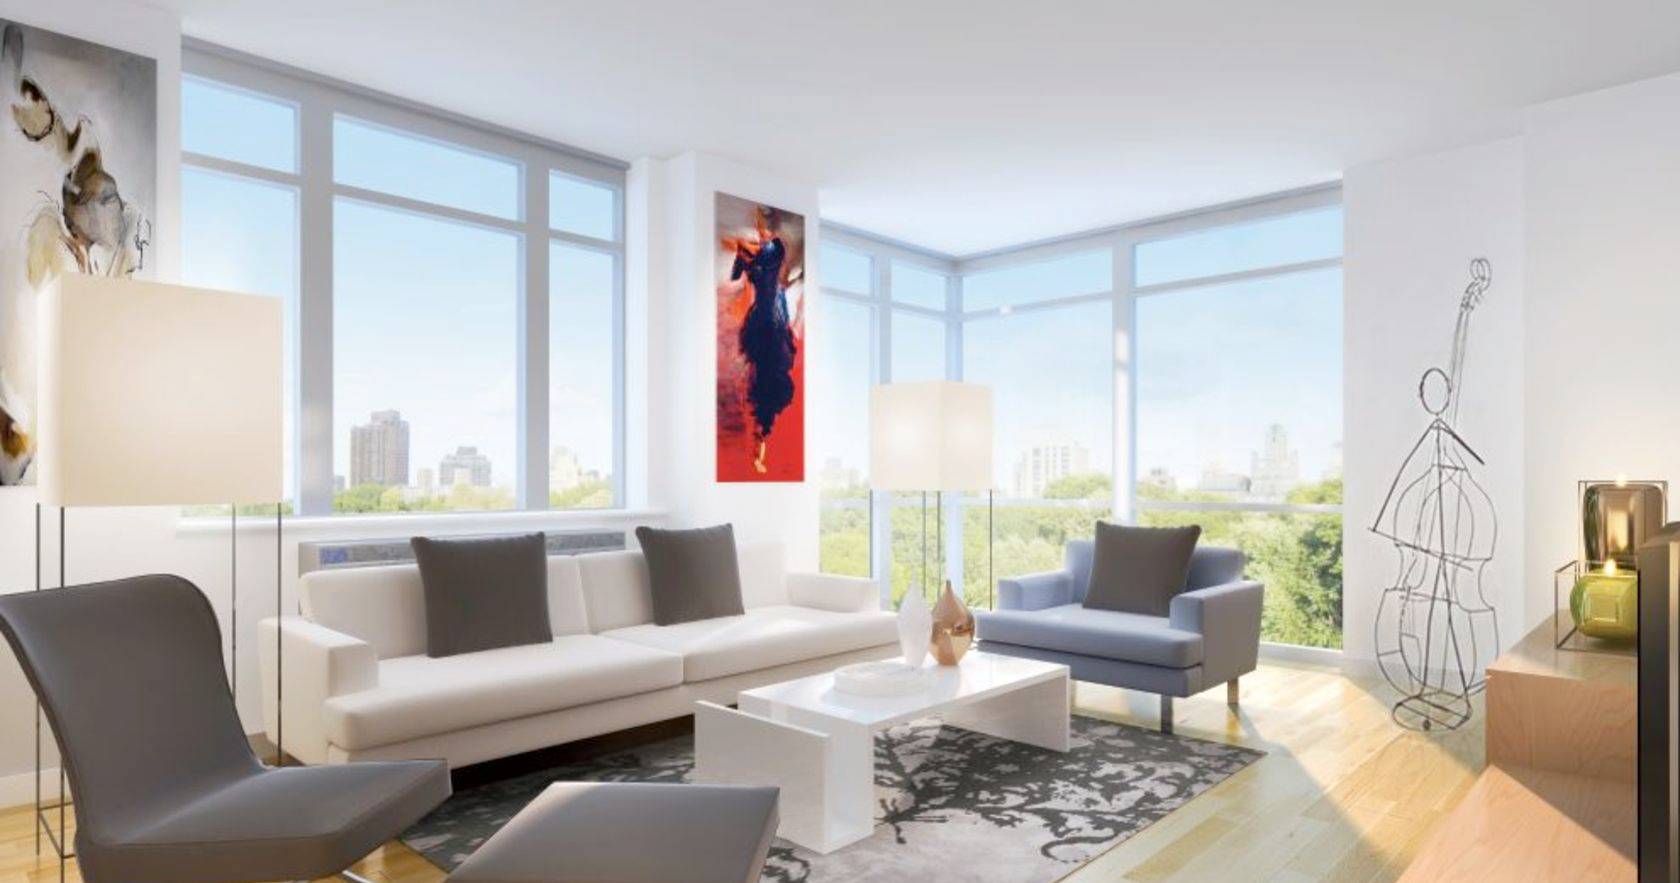 ★★★★★ Upper West Side <> Ultra Luxury 1Bed with Home Office / JR 4  Condo For Rent <> 24Hr Doorman <> Pool , Gym & Tennis Court. Steps To Colubus Circle and Lincoln Square